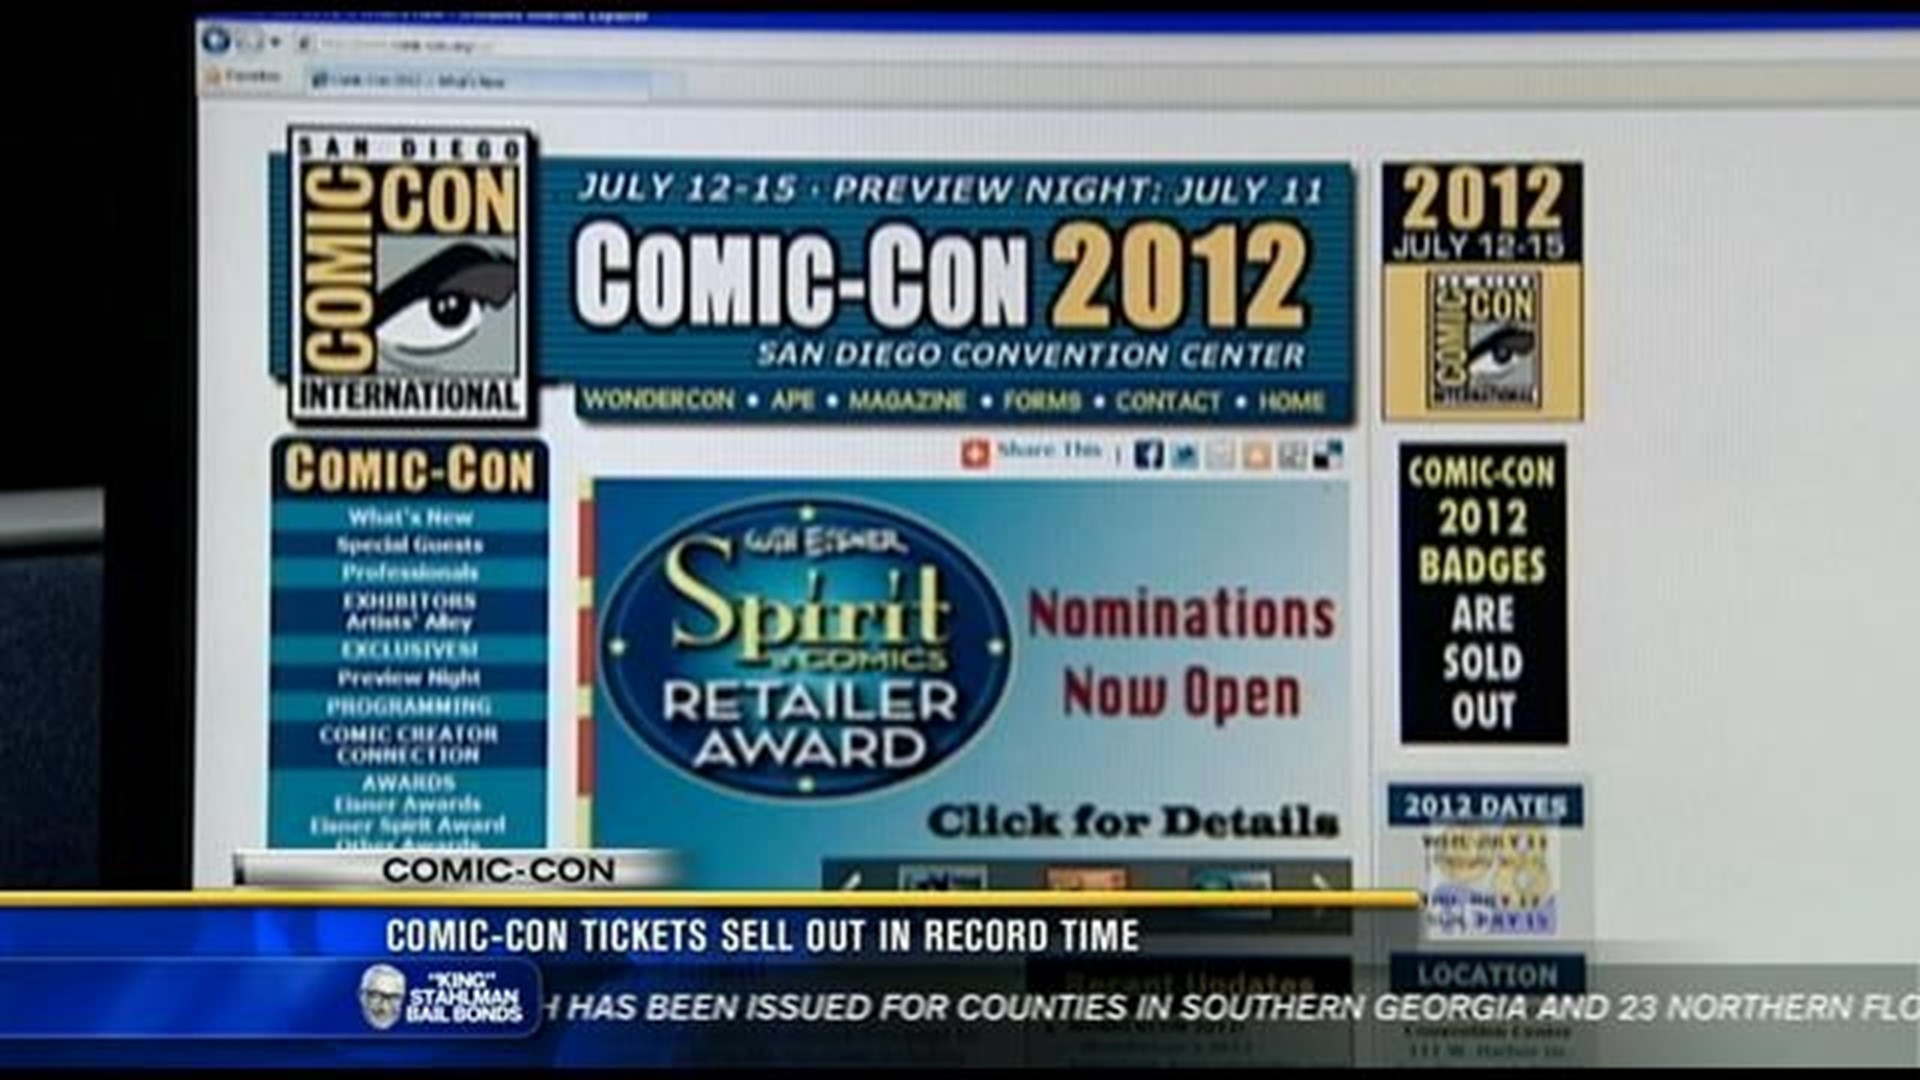 ComicCon tickets sell out in record time